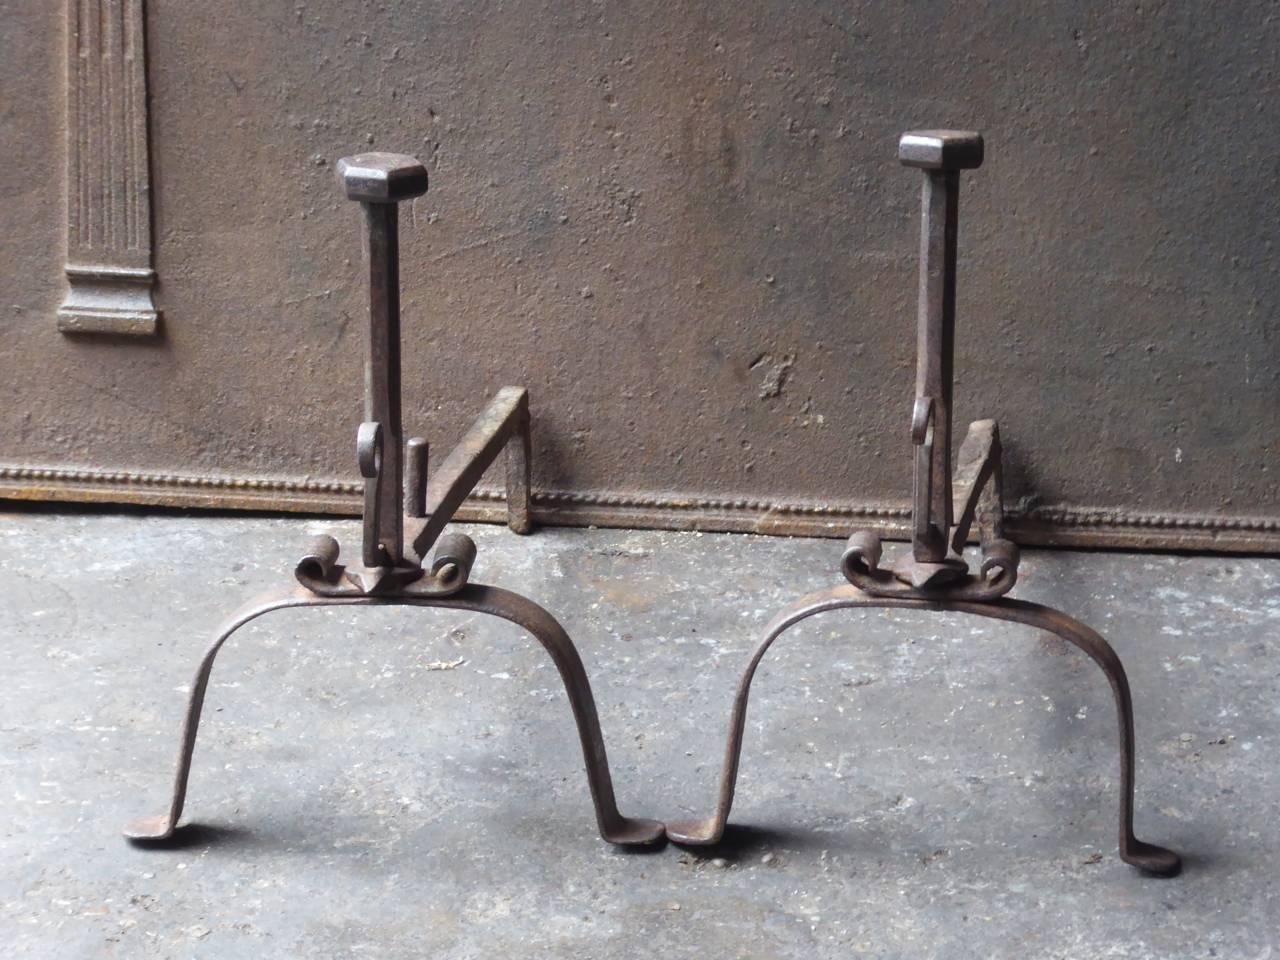 19th century French Napoleon III period fire dogs made of wrought iron. The condition of the andirons is good.

